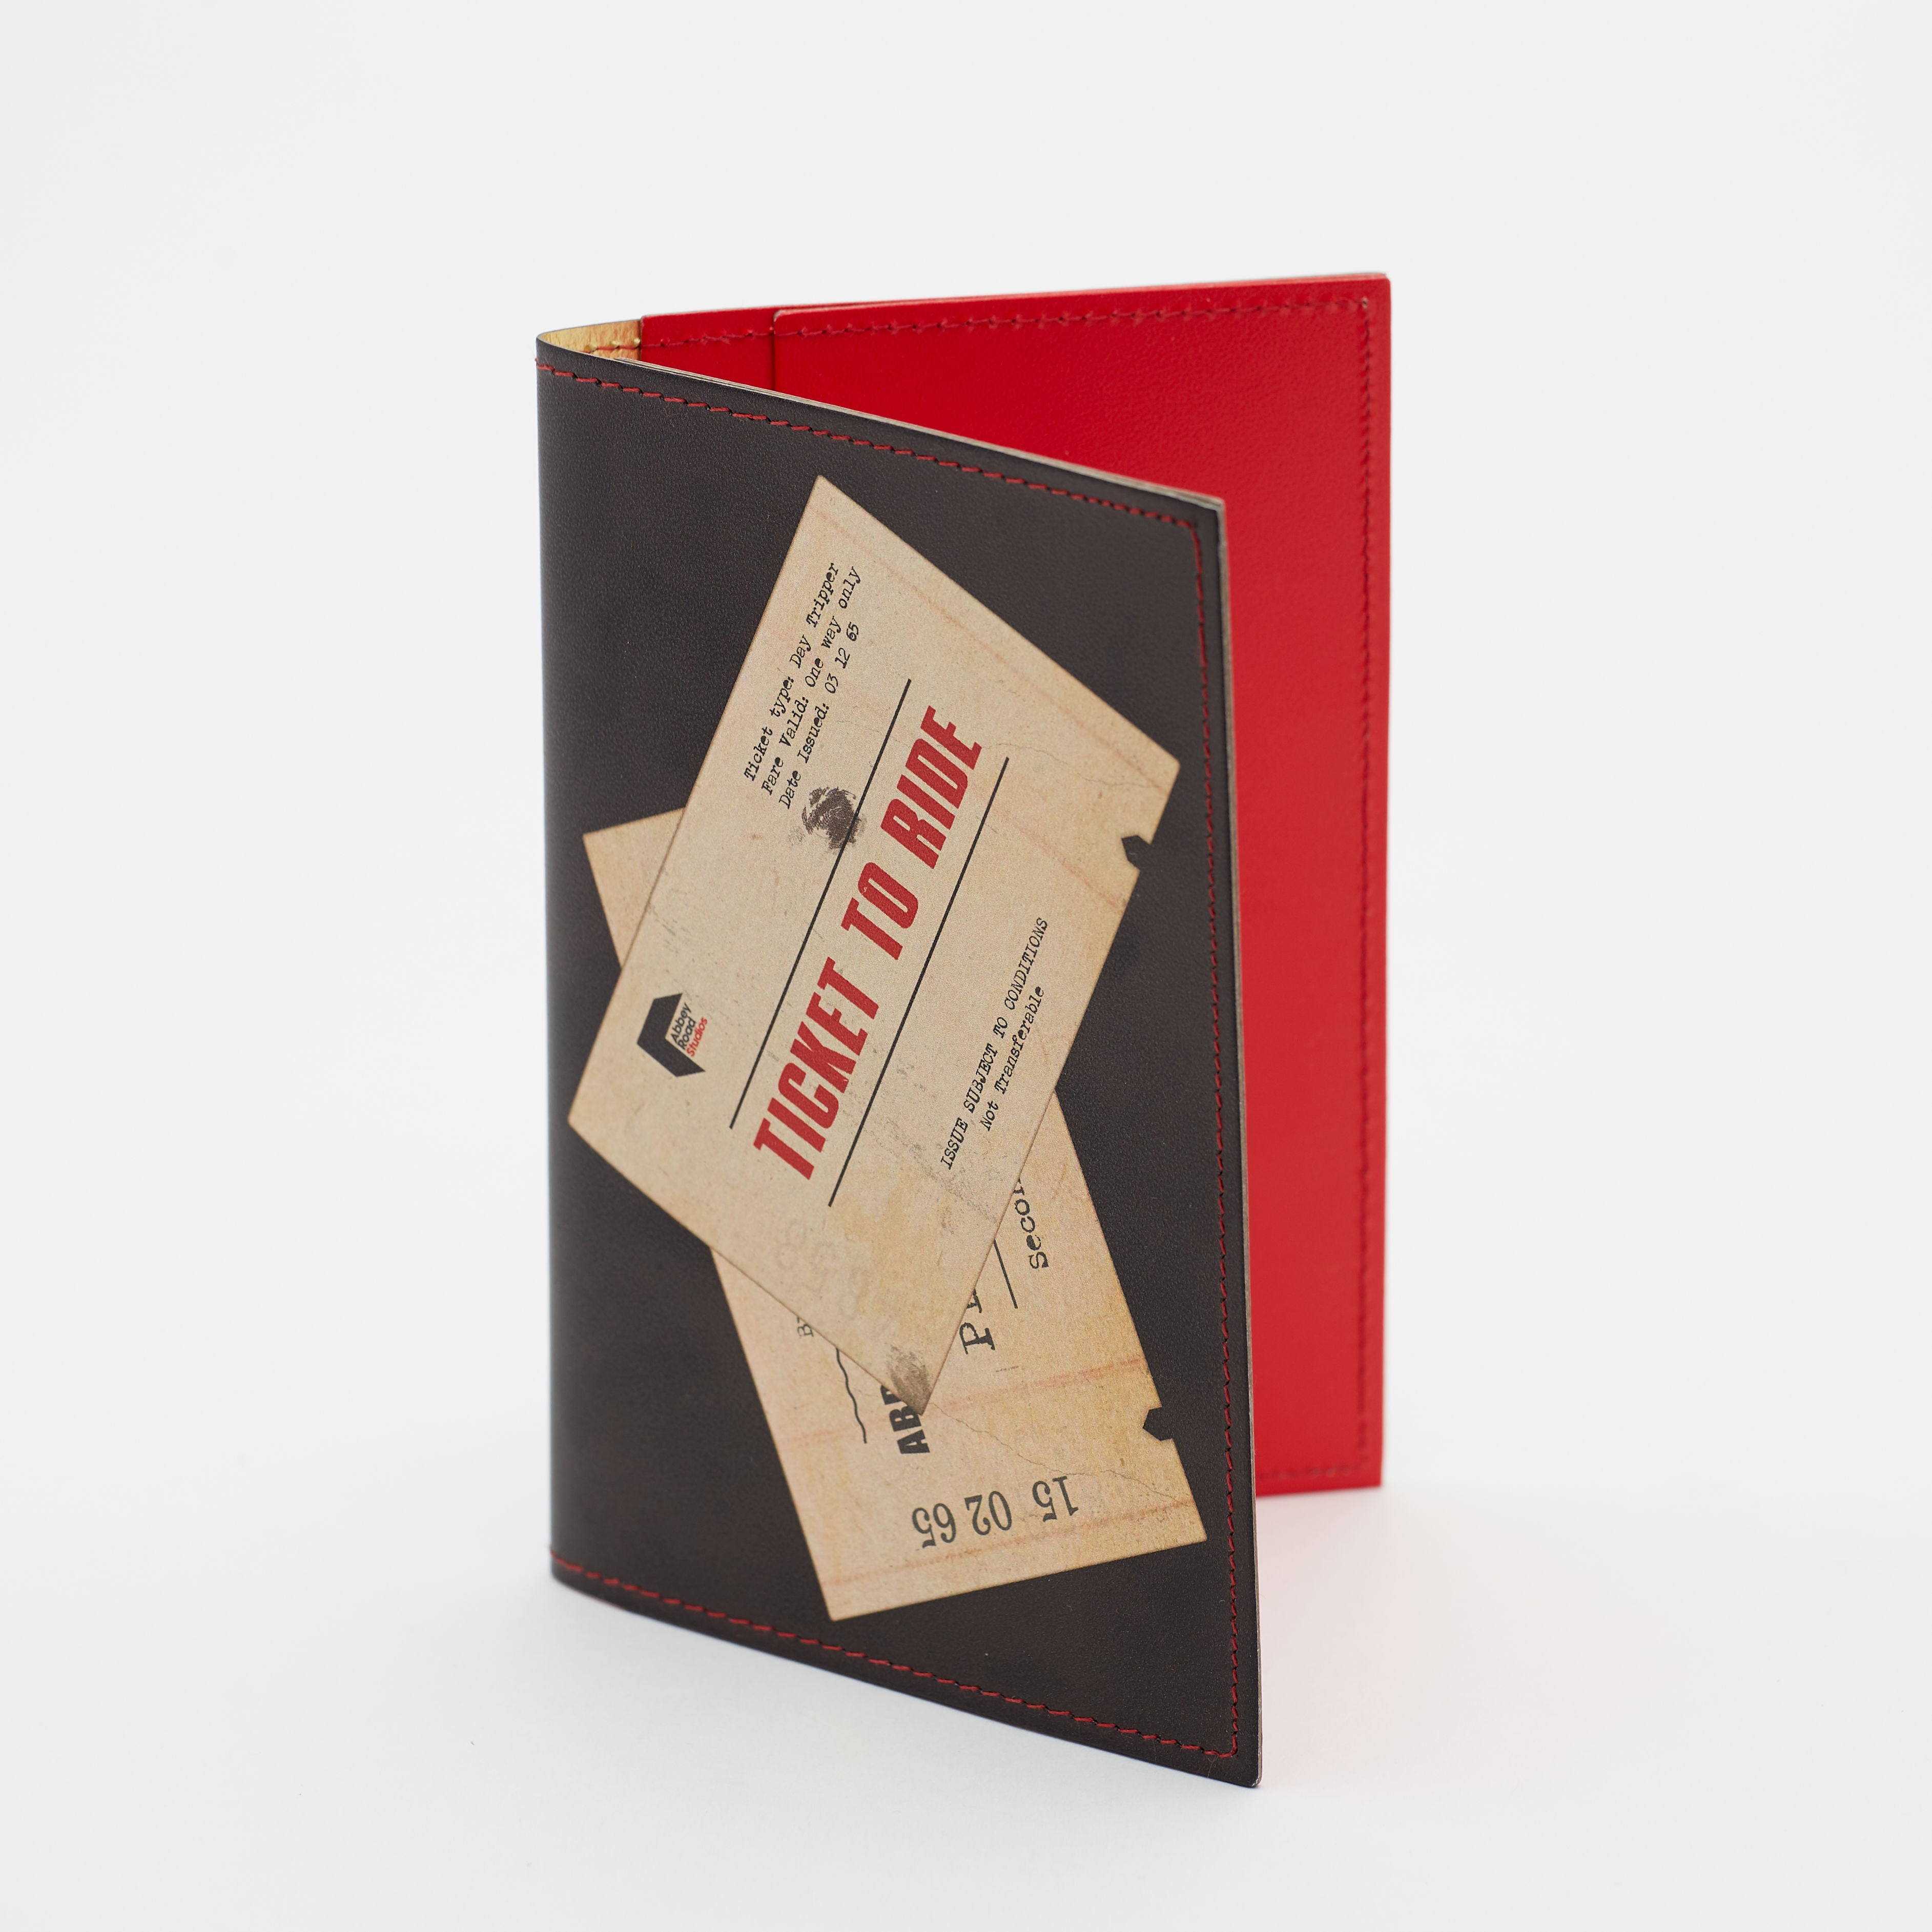 Abbey Road Studios - Leather Passport Holder - Ticket To Ride